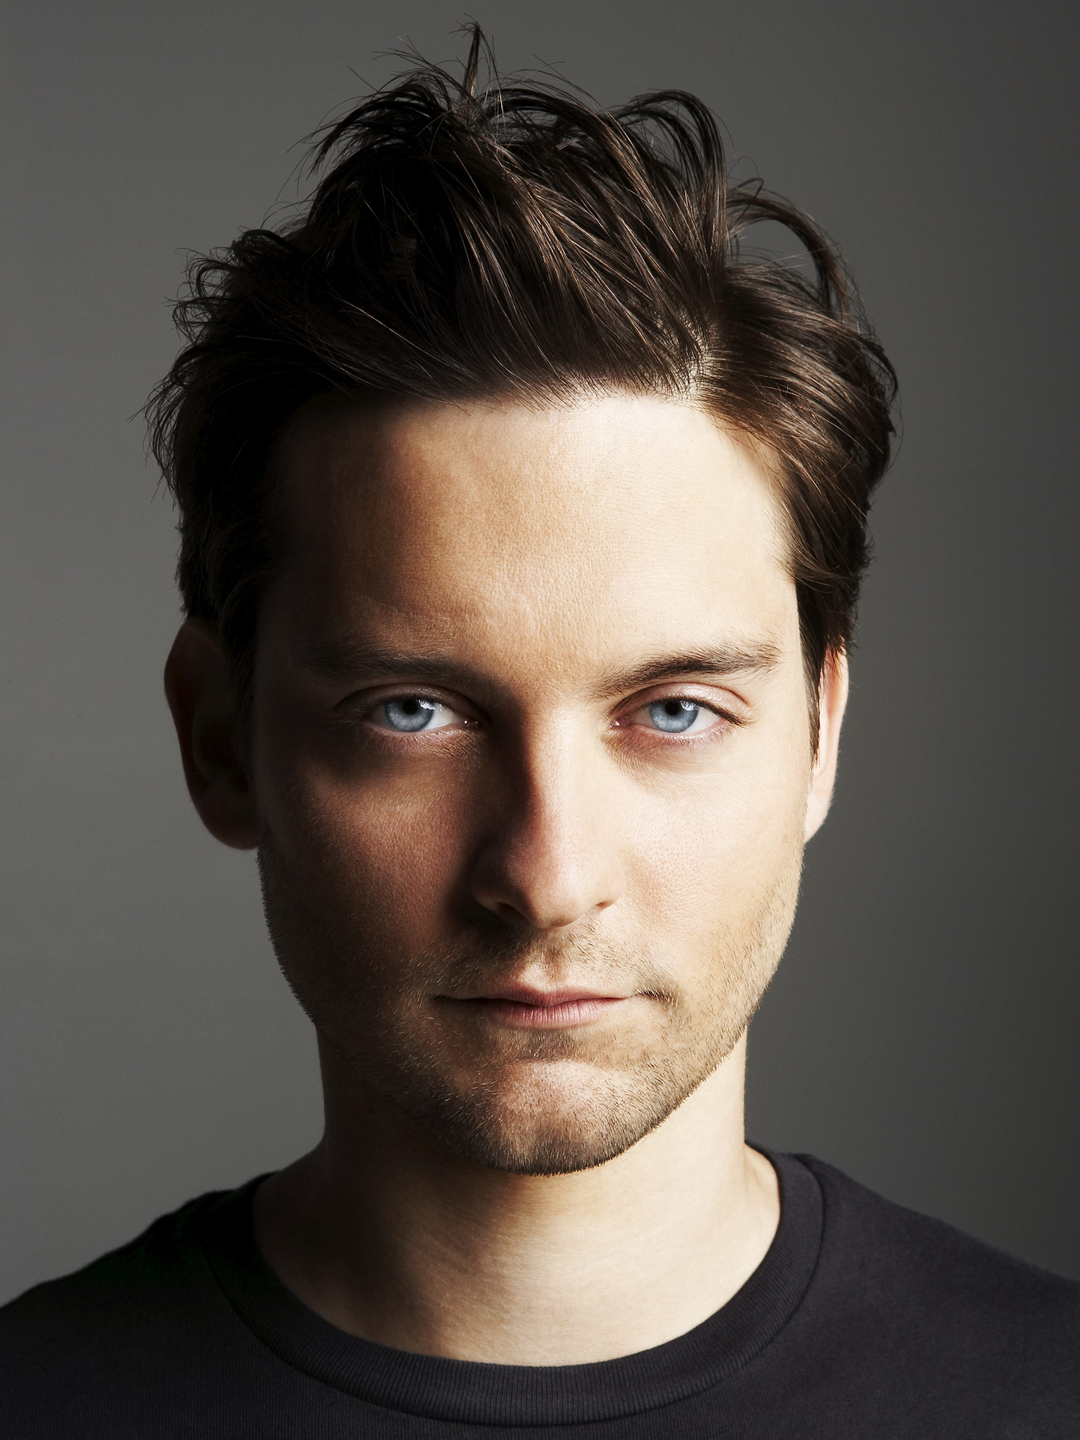 Tobey Maguire place of birth